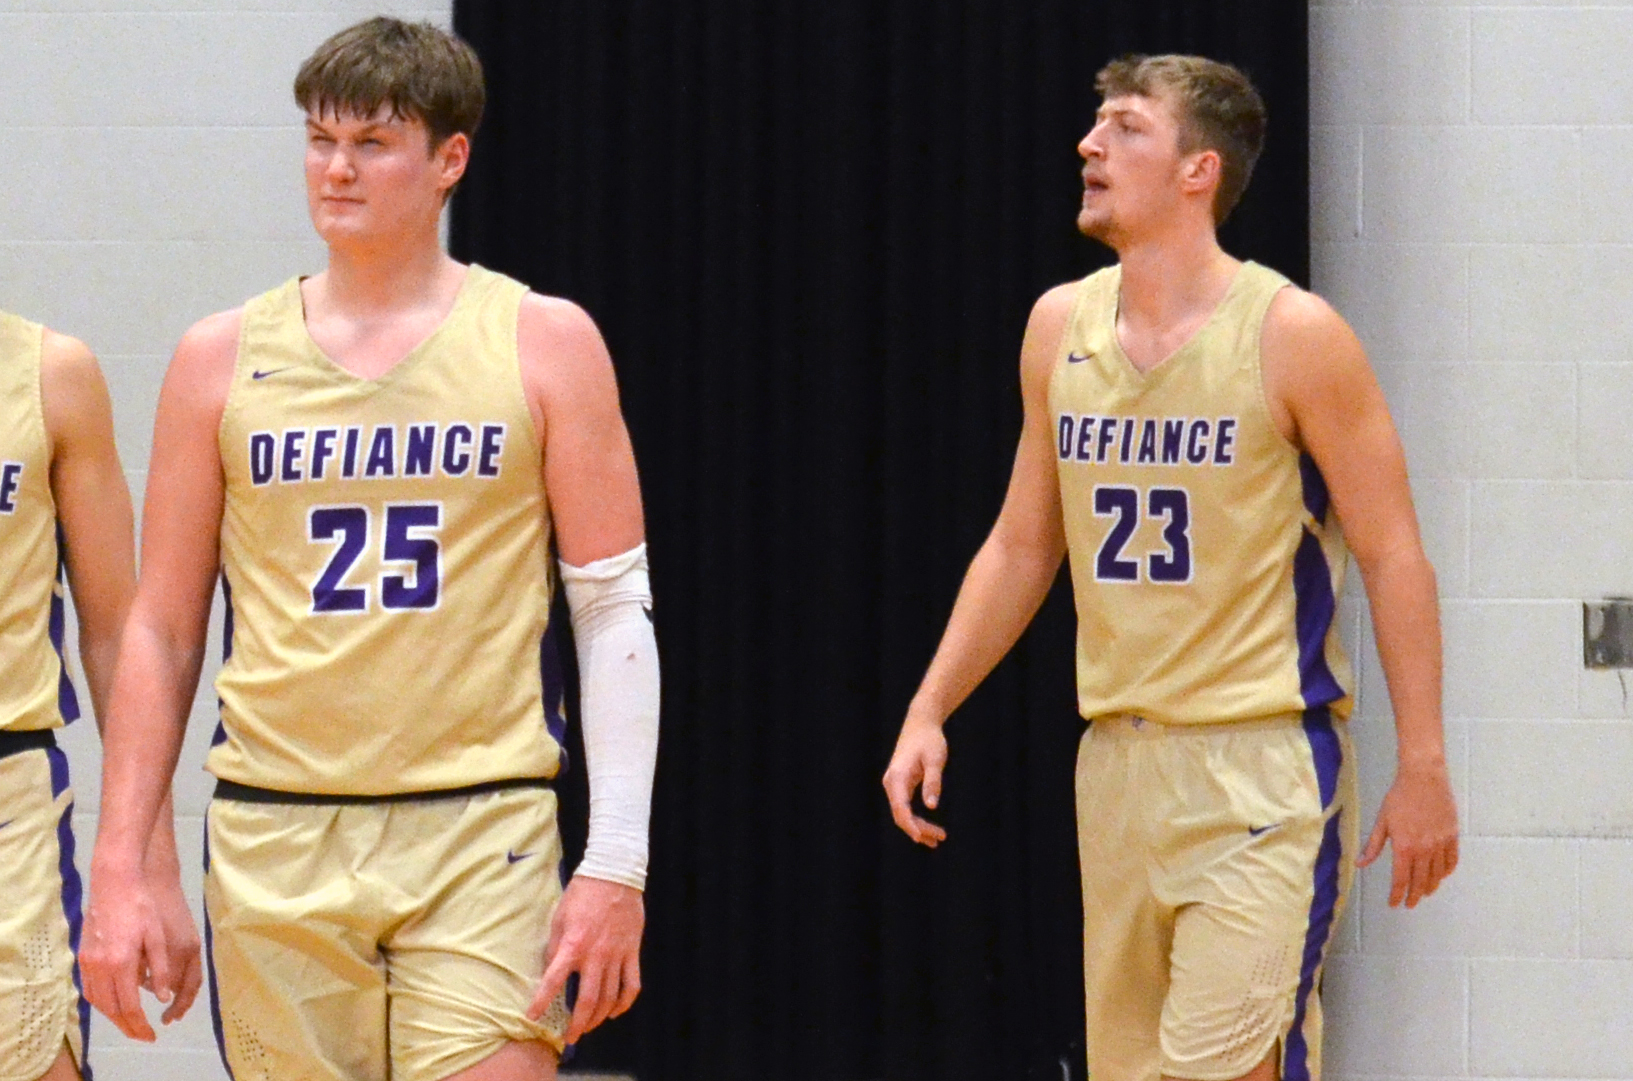 Men’s basketball returns with loss in HCAC Championship quarterfinals